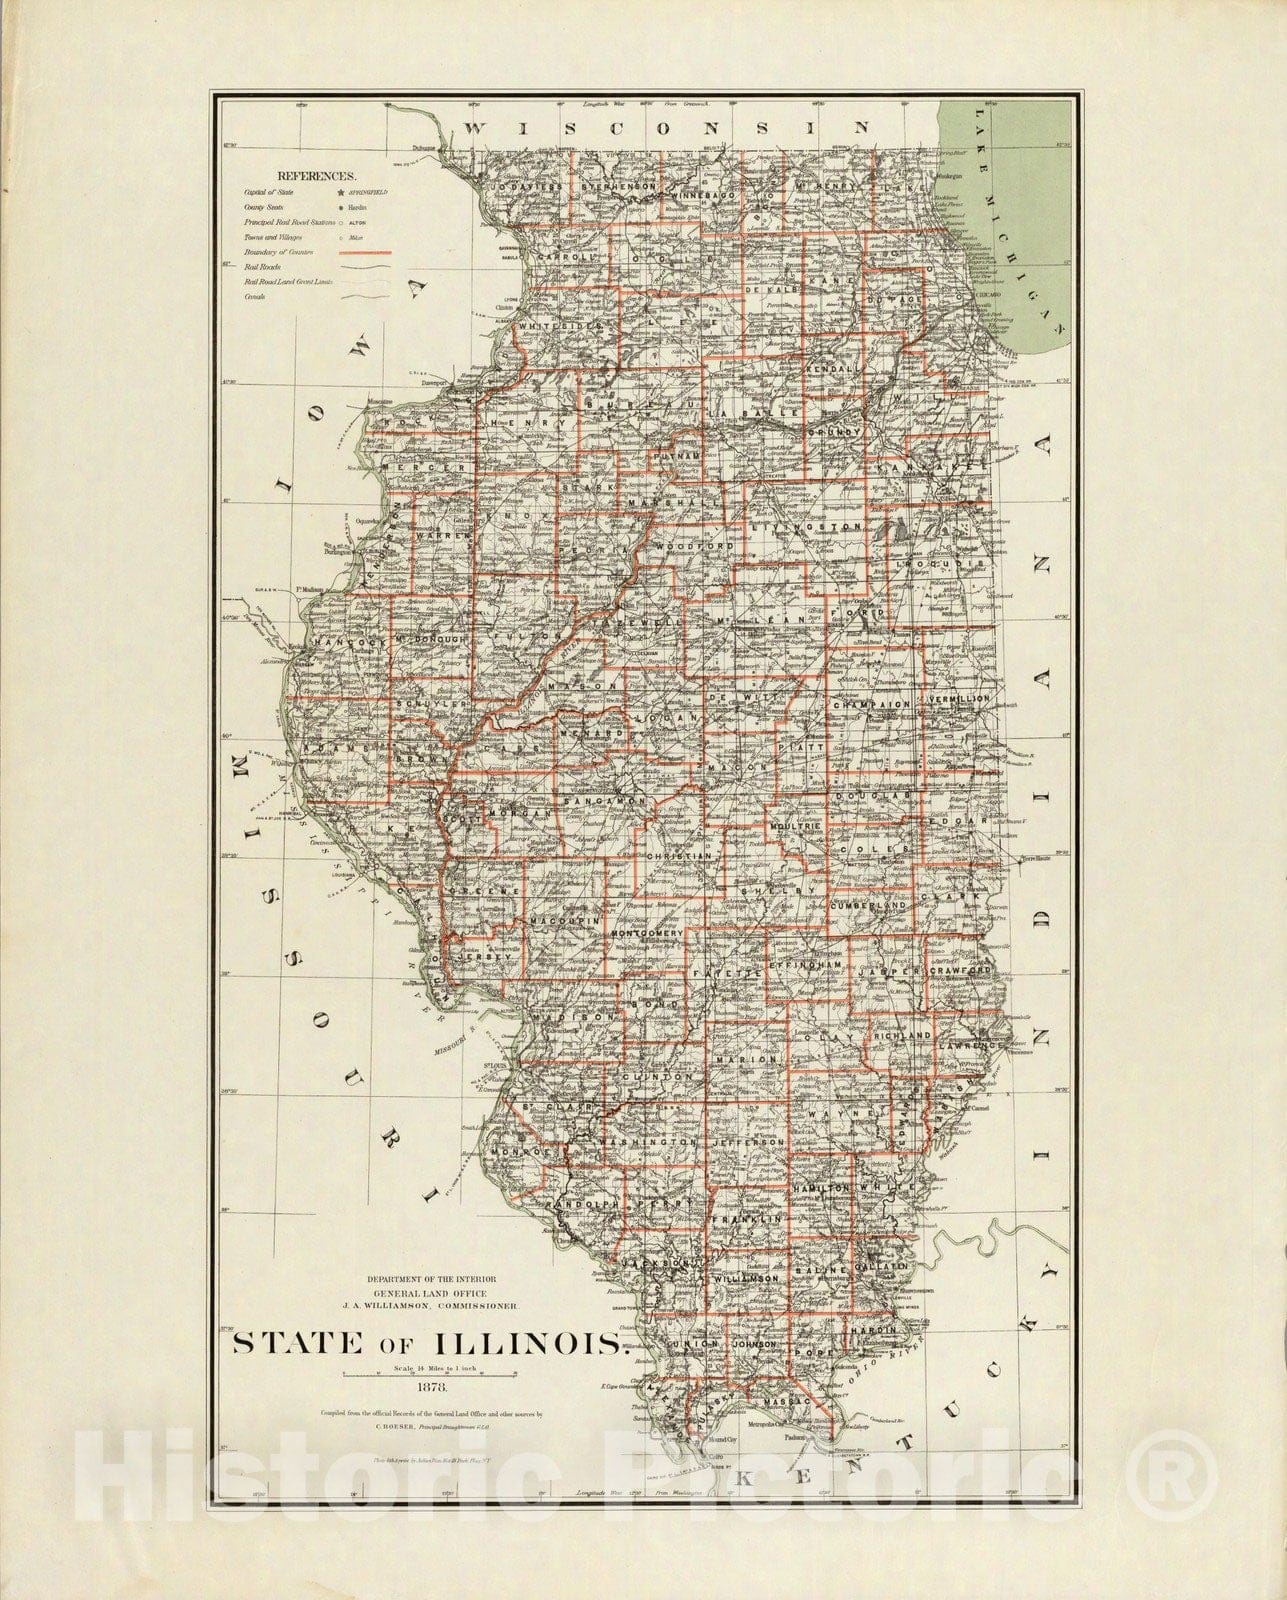 Historic Map : Department of The Interior General Land office Map - State of Illinois. 1878 - Vintage Wall Art